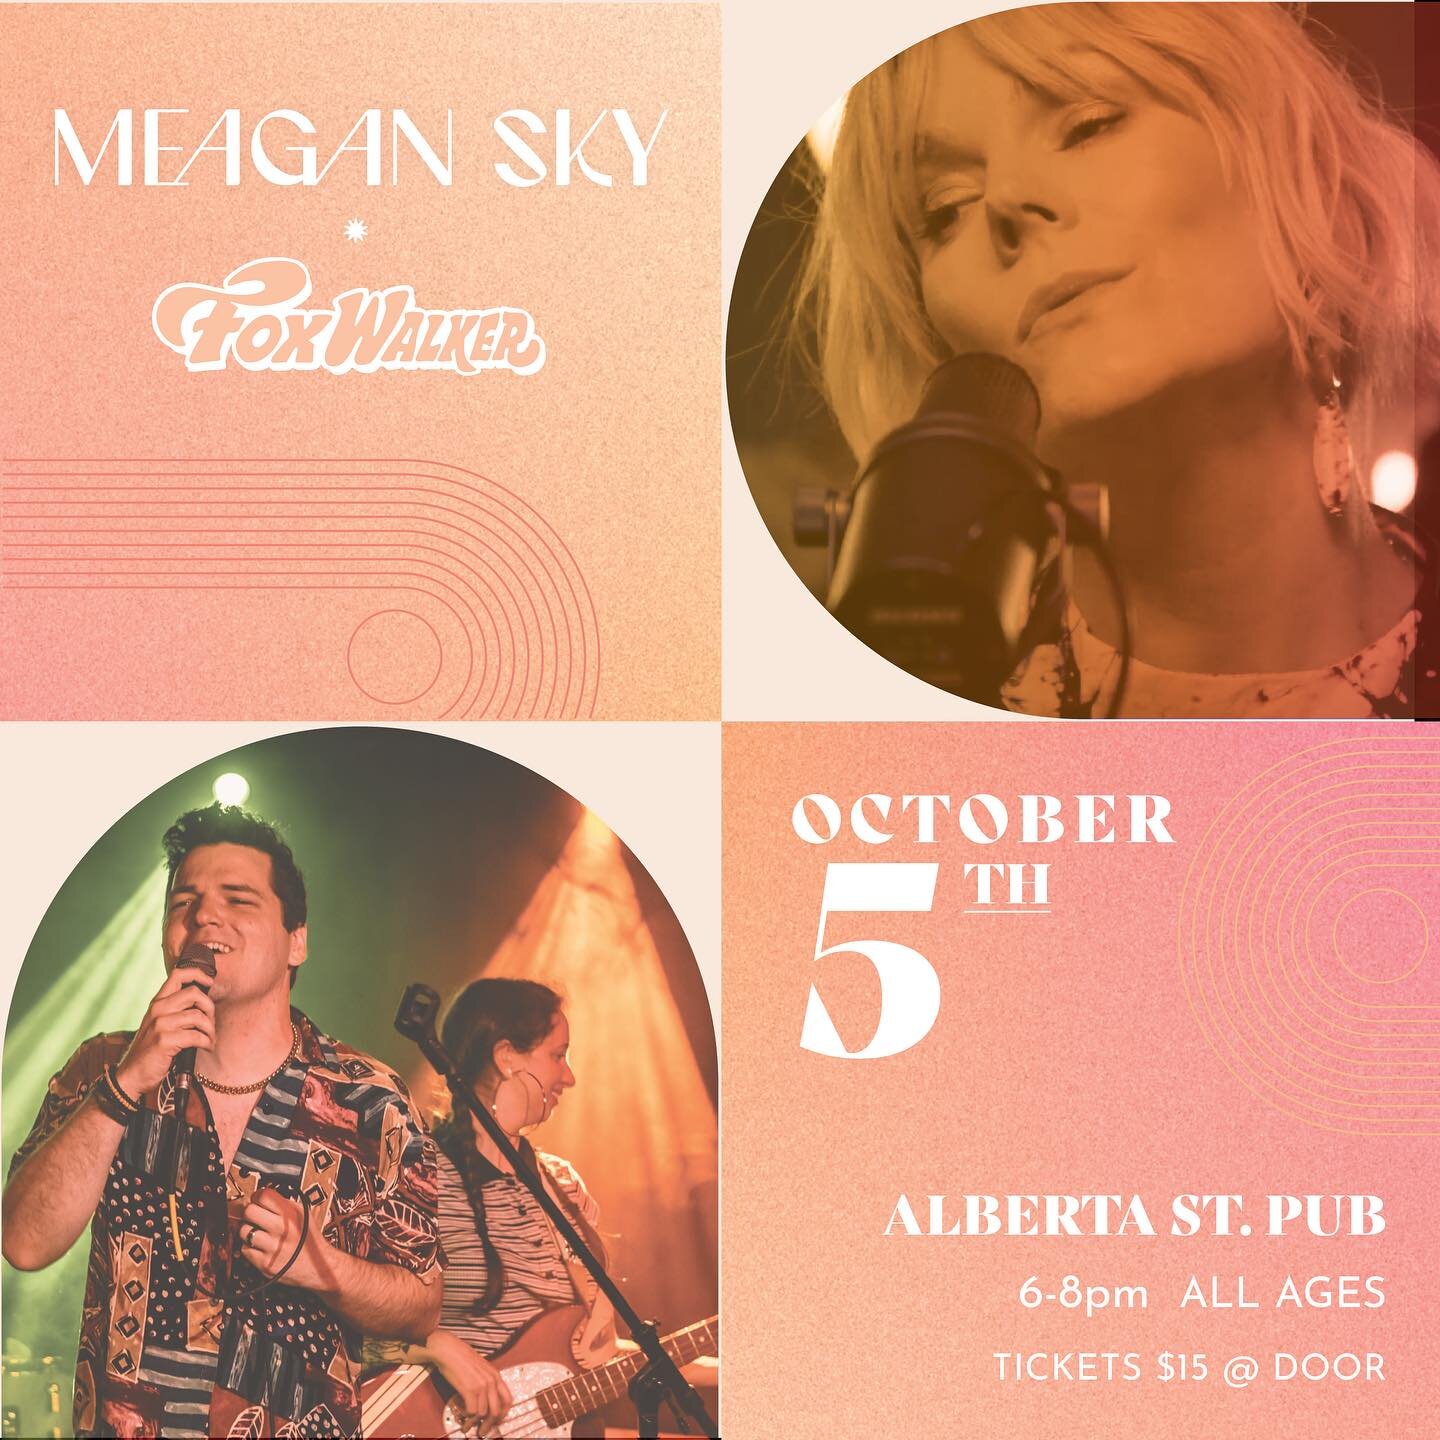 Super excited to be adding @foxwalkermusic to the bill at my upcoming show!!! 
🦊💃💗⚡️🔥

Join us for an uplifting, soulful night. Bring the kids. It&rsquo;s all ages! Tater tots for everyone!!! 

OCTOBER 5th
Alberta St Pub, Portland OR
6-8pm all ag